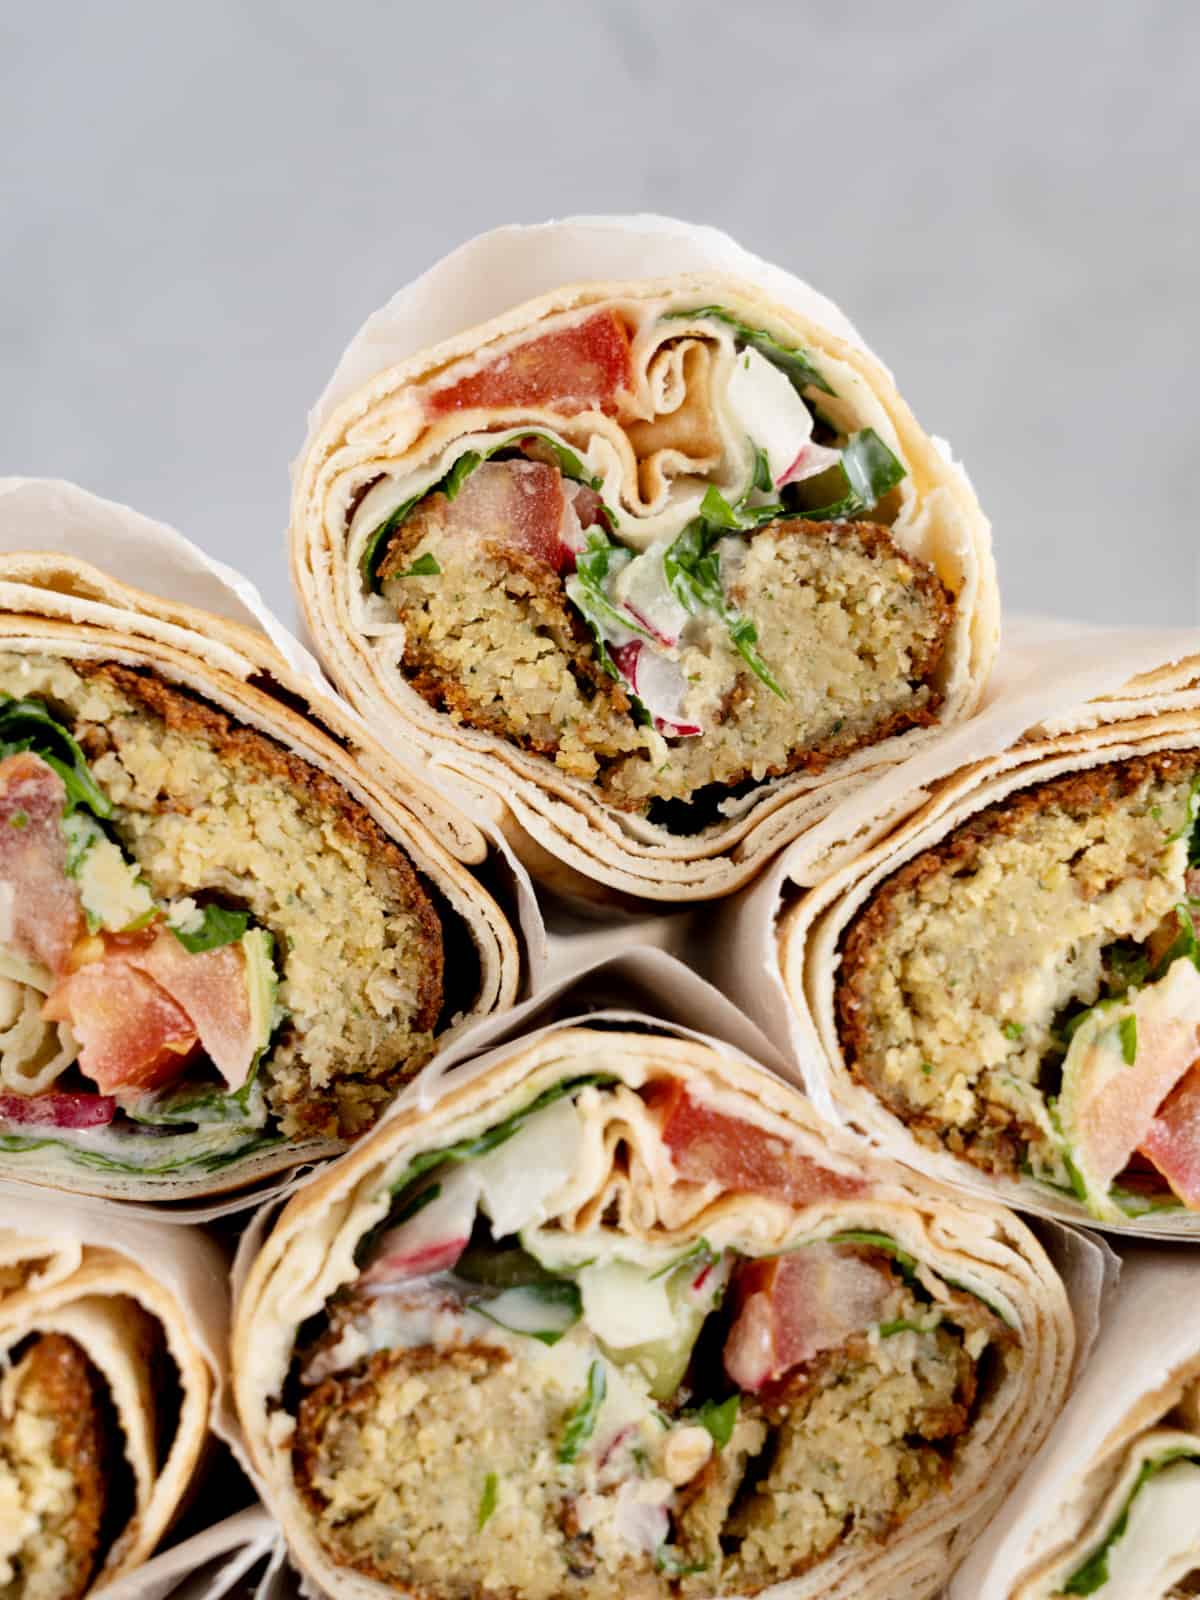 a stack of pita sandwich rolls filled with falafel and veggies